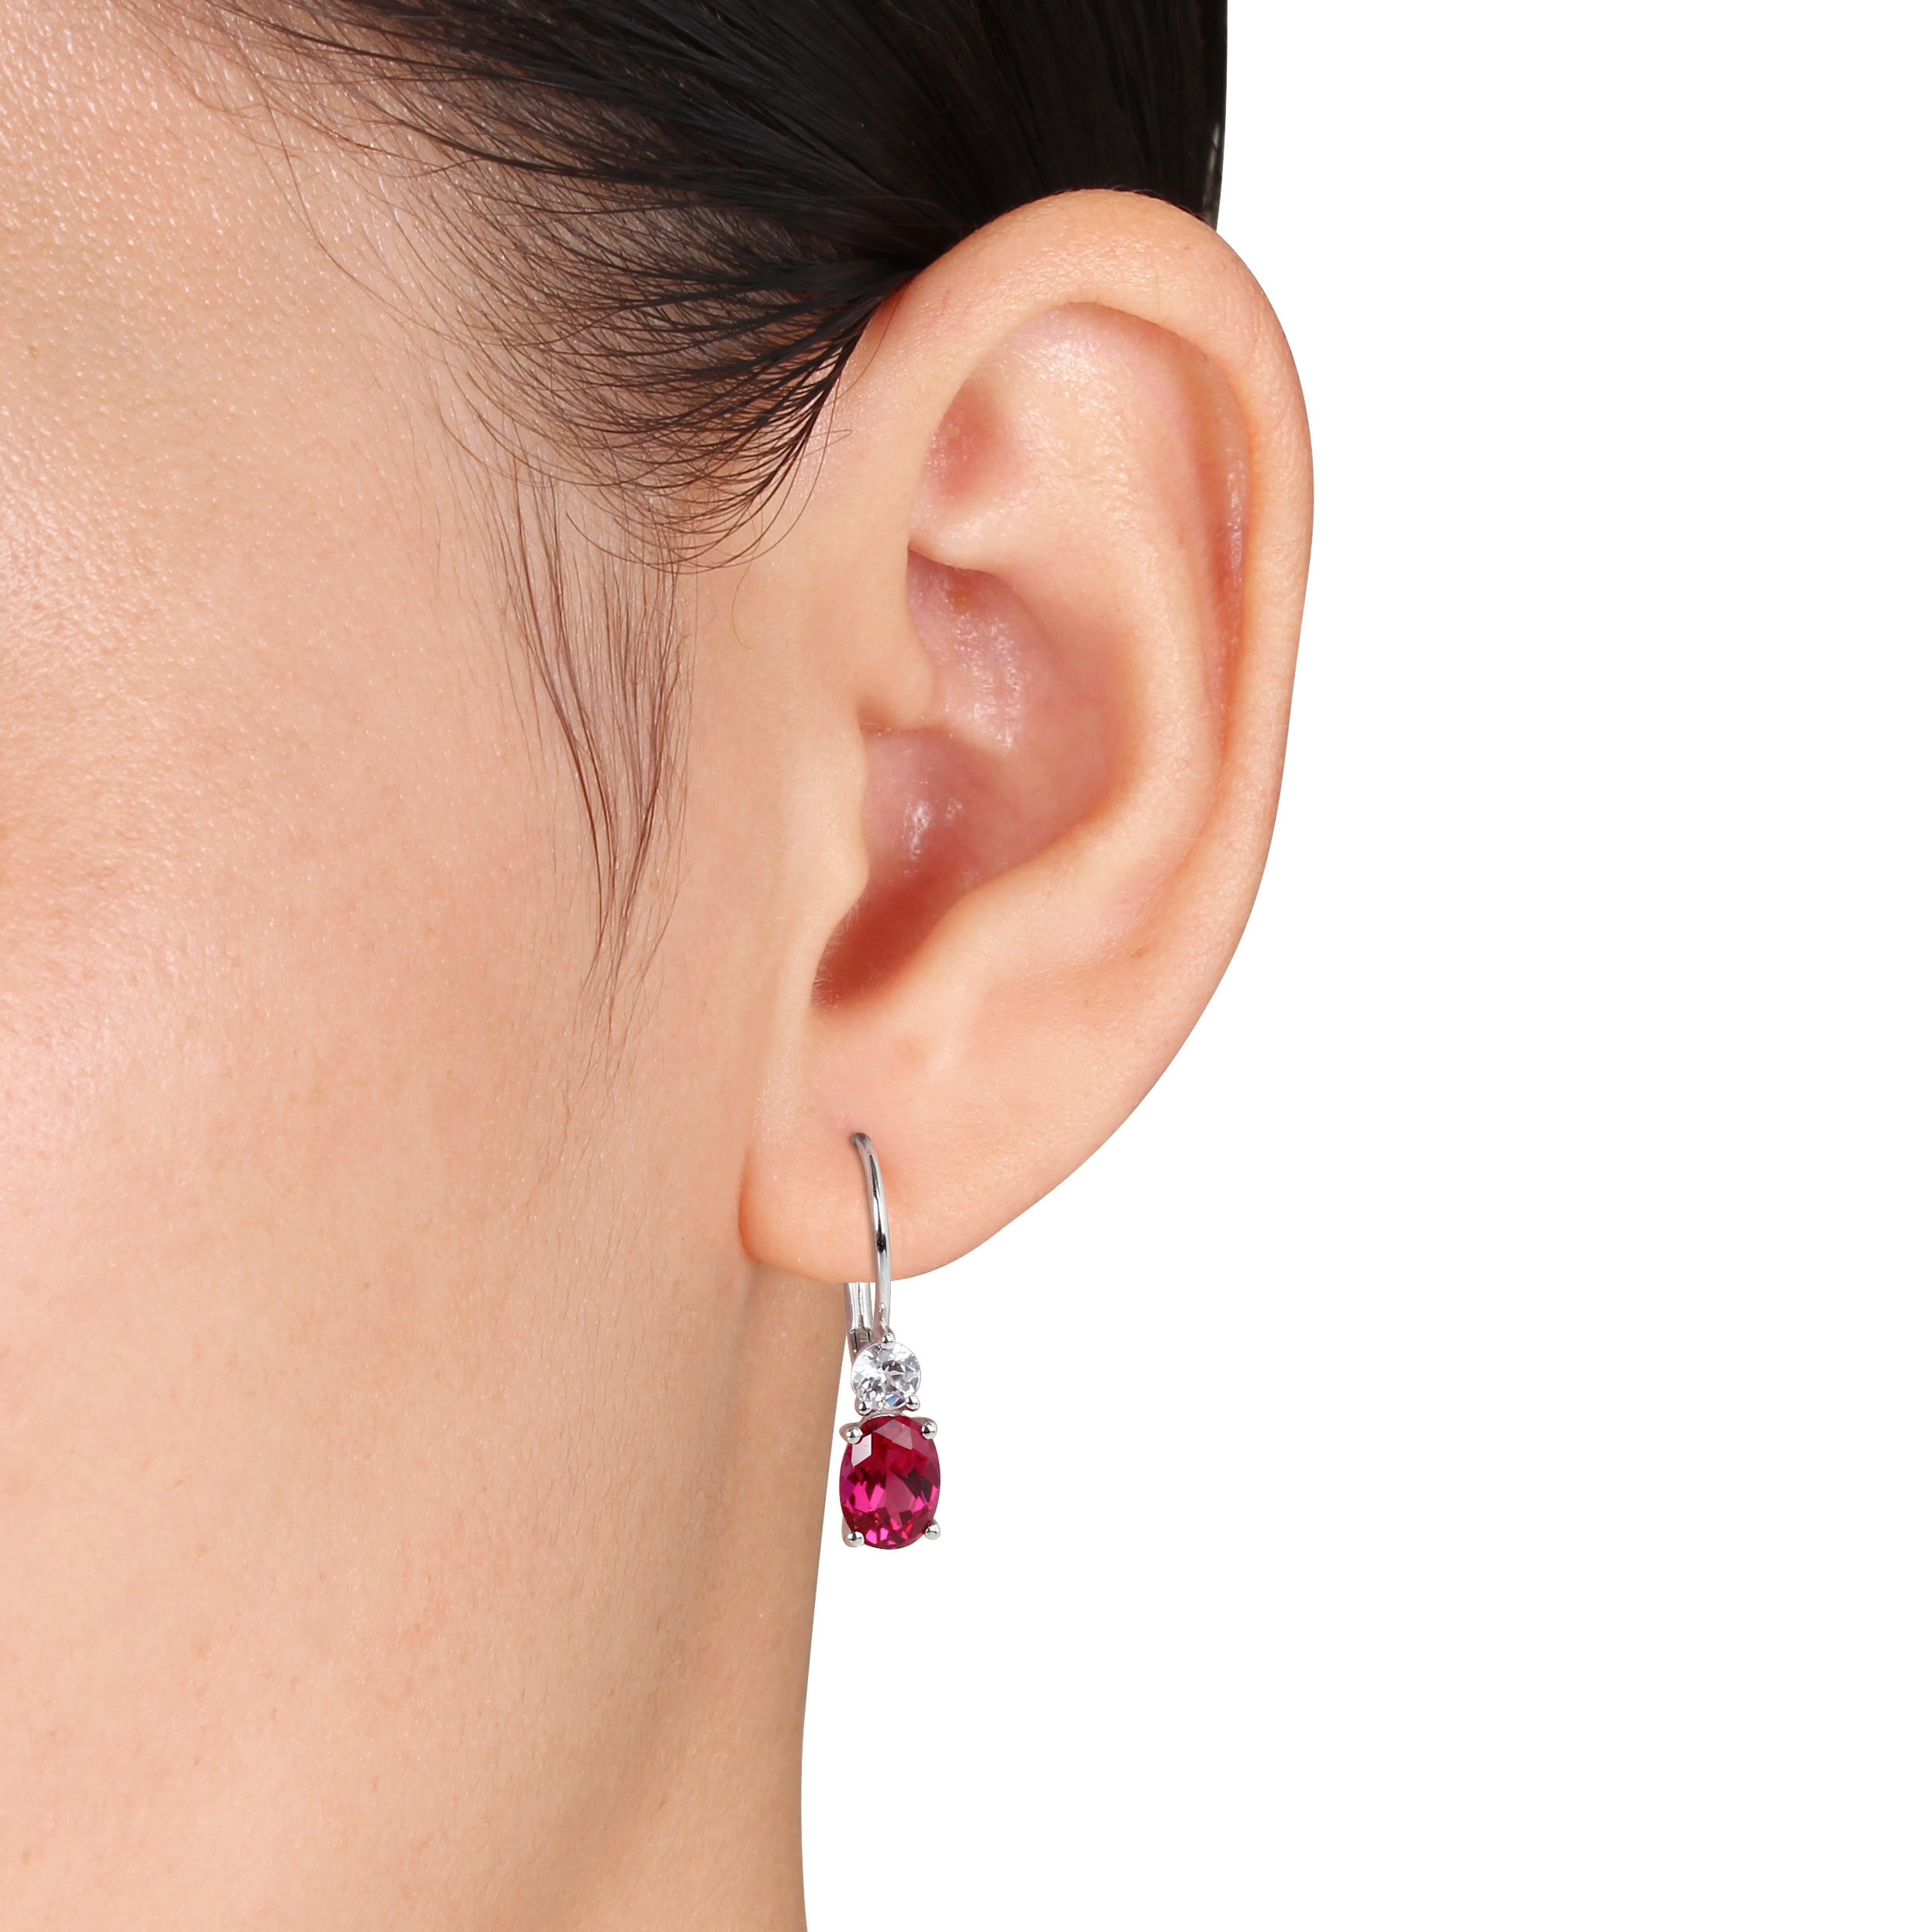 4 5/8 CT TGW Created Ruby and White Sapphire Leverback Earrings in Sterling Silver